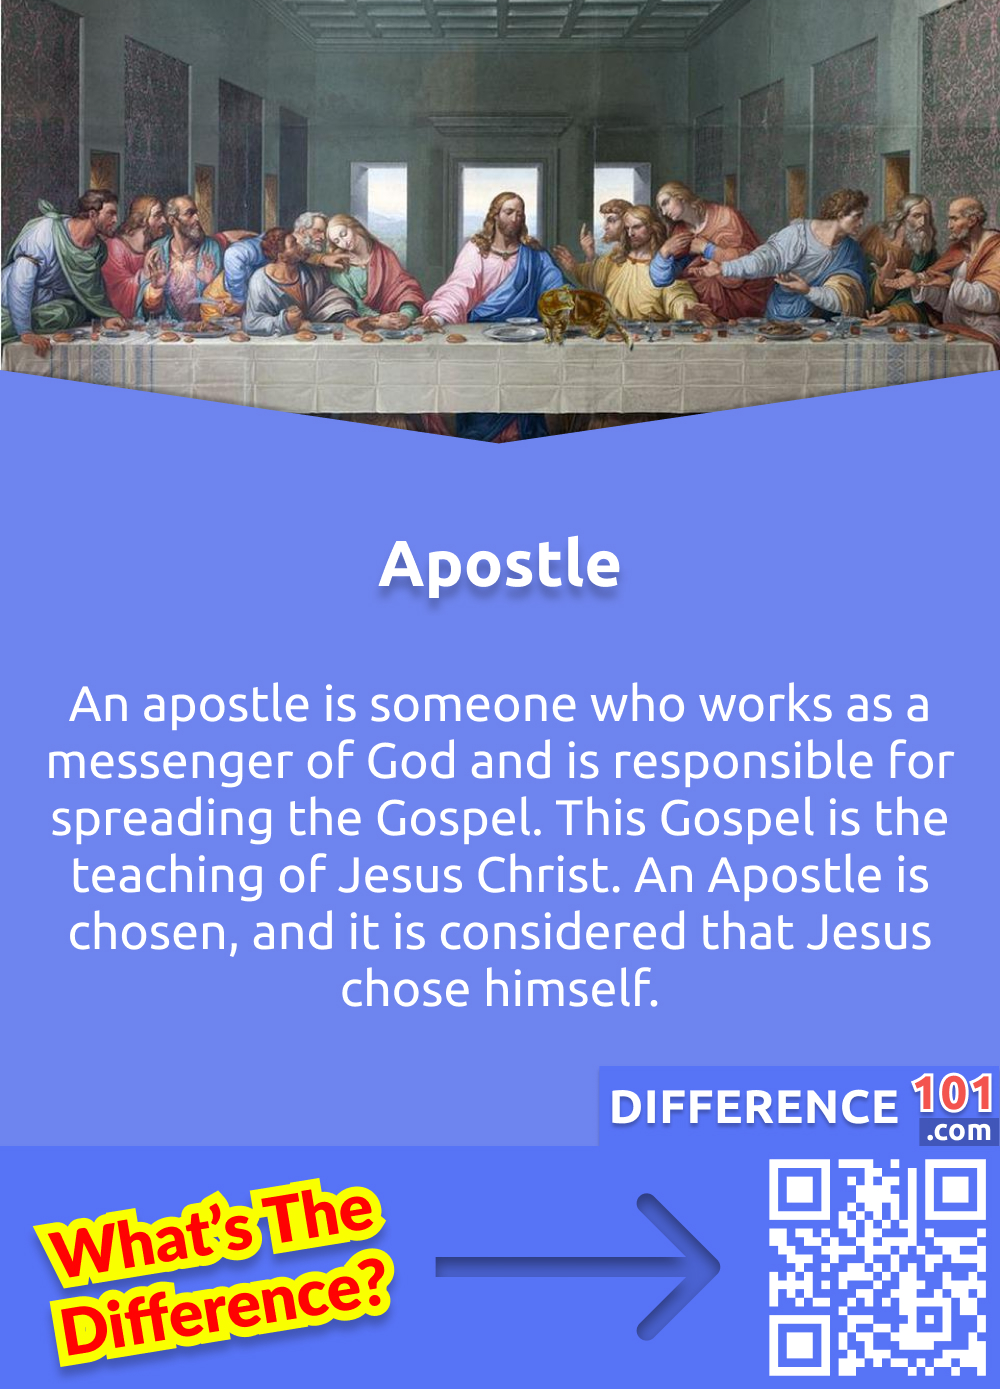 What Is an Apostle? An apostle is someone who works as a messenger of God and is responsible for spreading the Gospel. This Gospel is the teaching of Jesus Christ. An Apostle is chosen, and it is considered that Jesus chose himself.